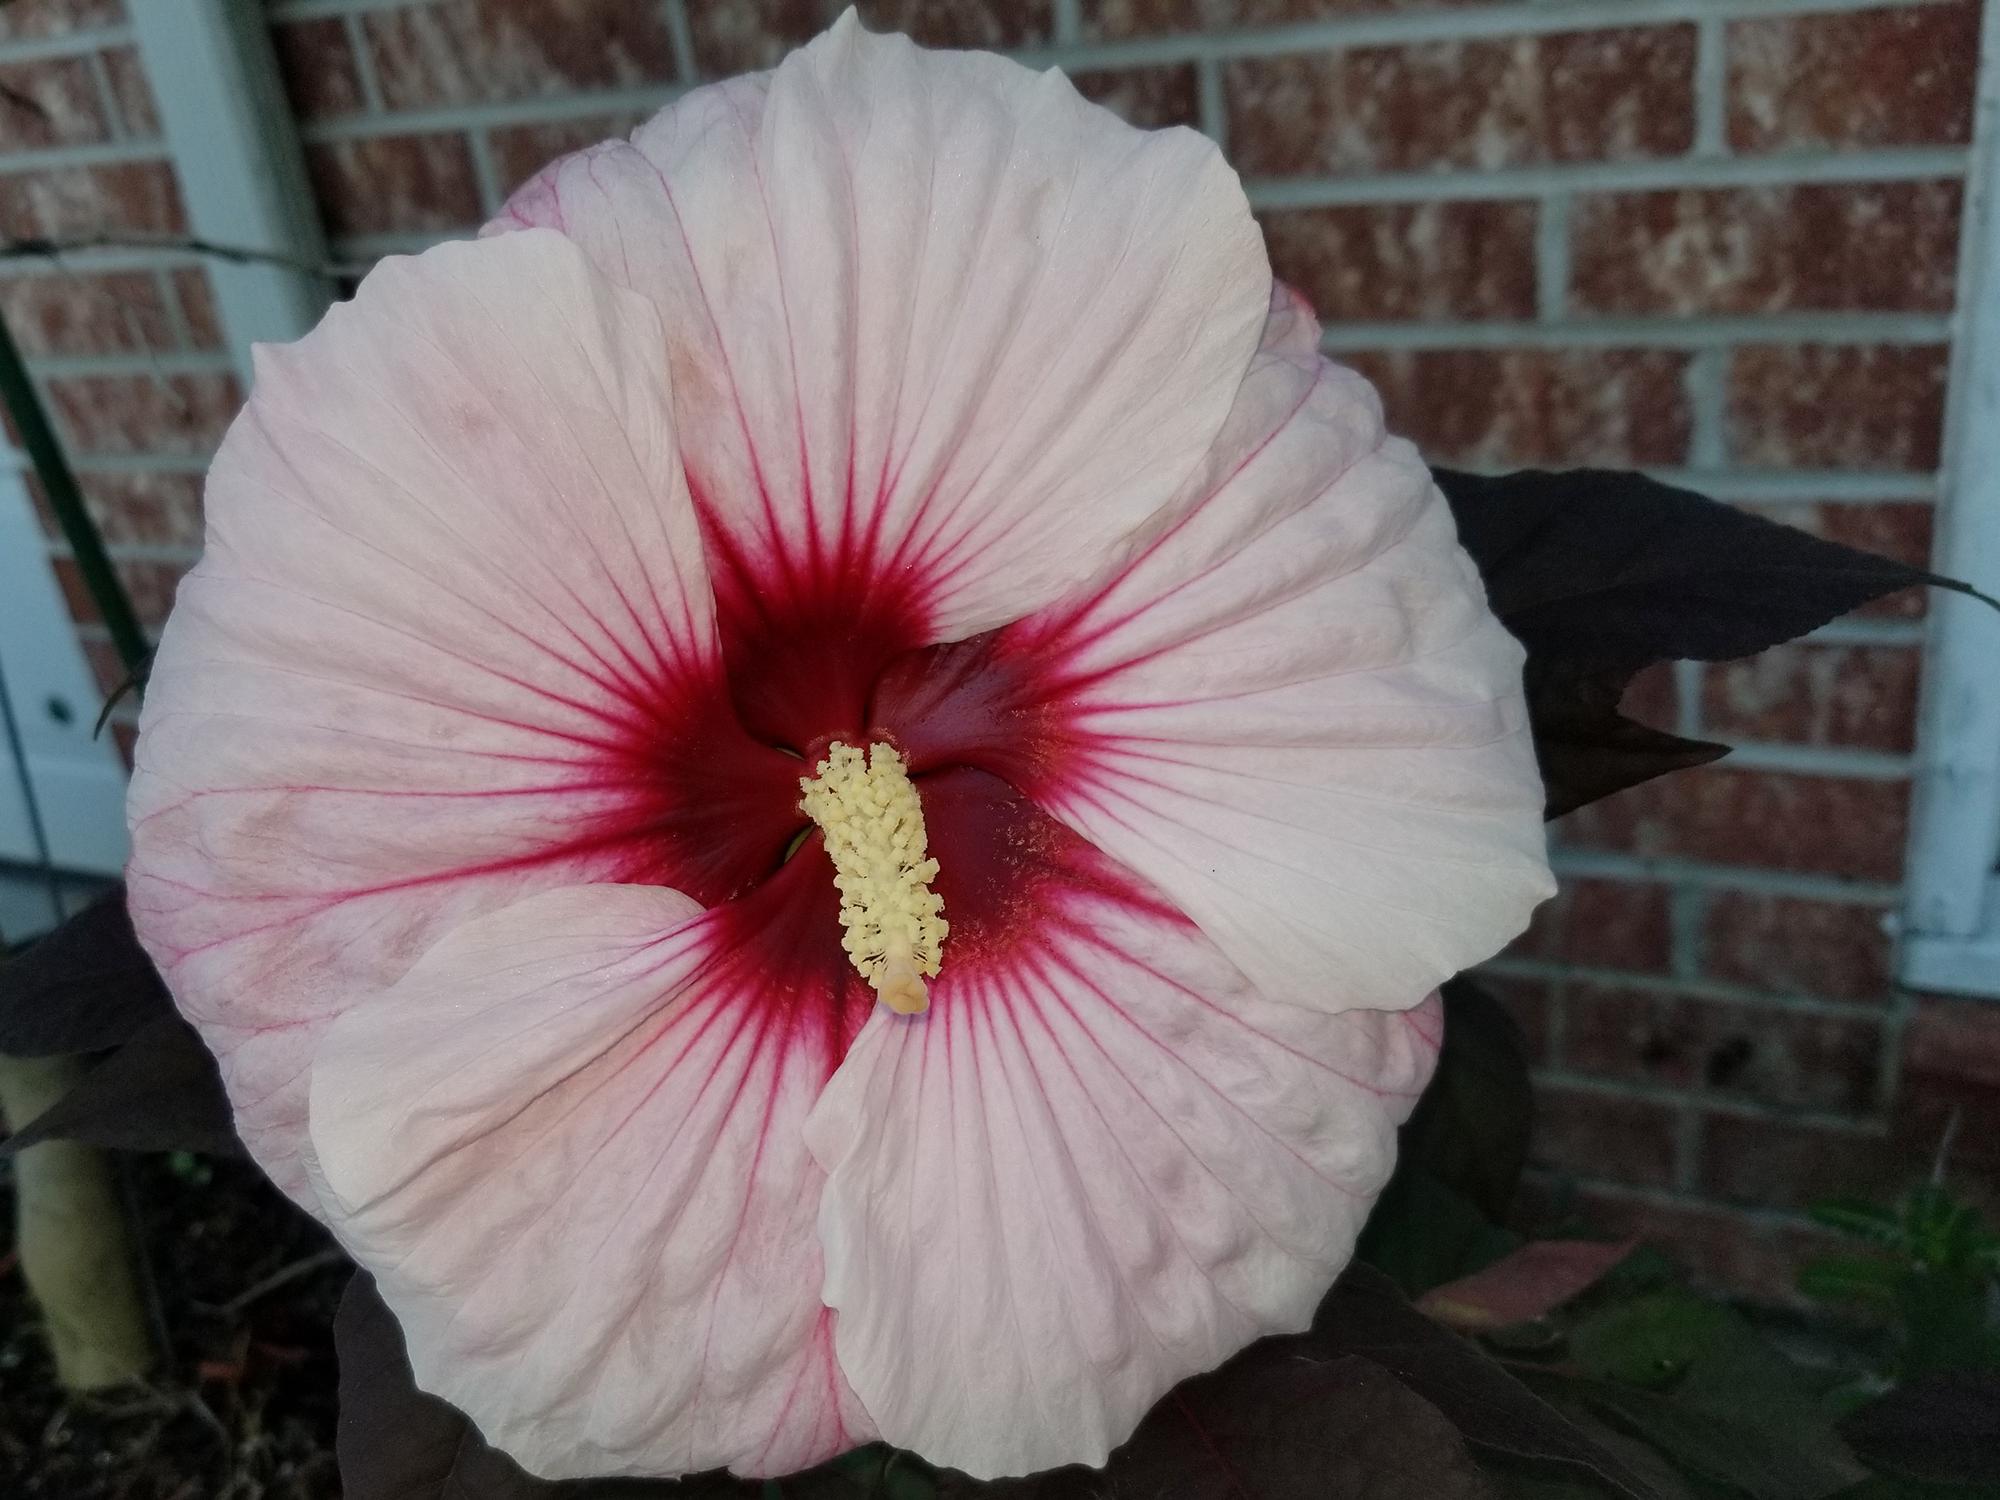 A large, light pink flower with a dark center fills the frame from its placement in front of a brick wall.